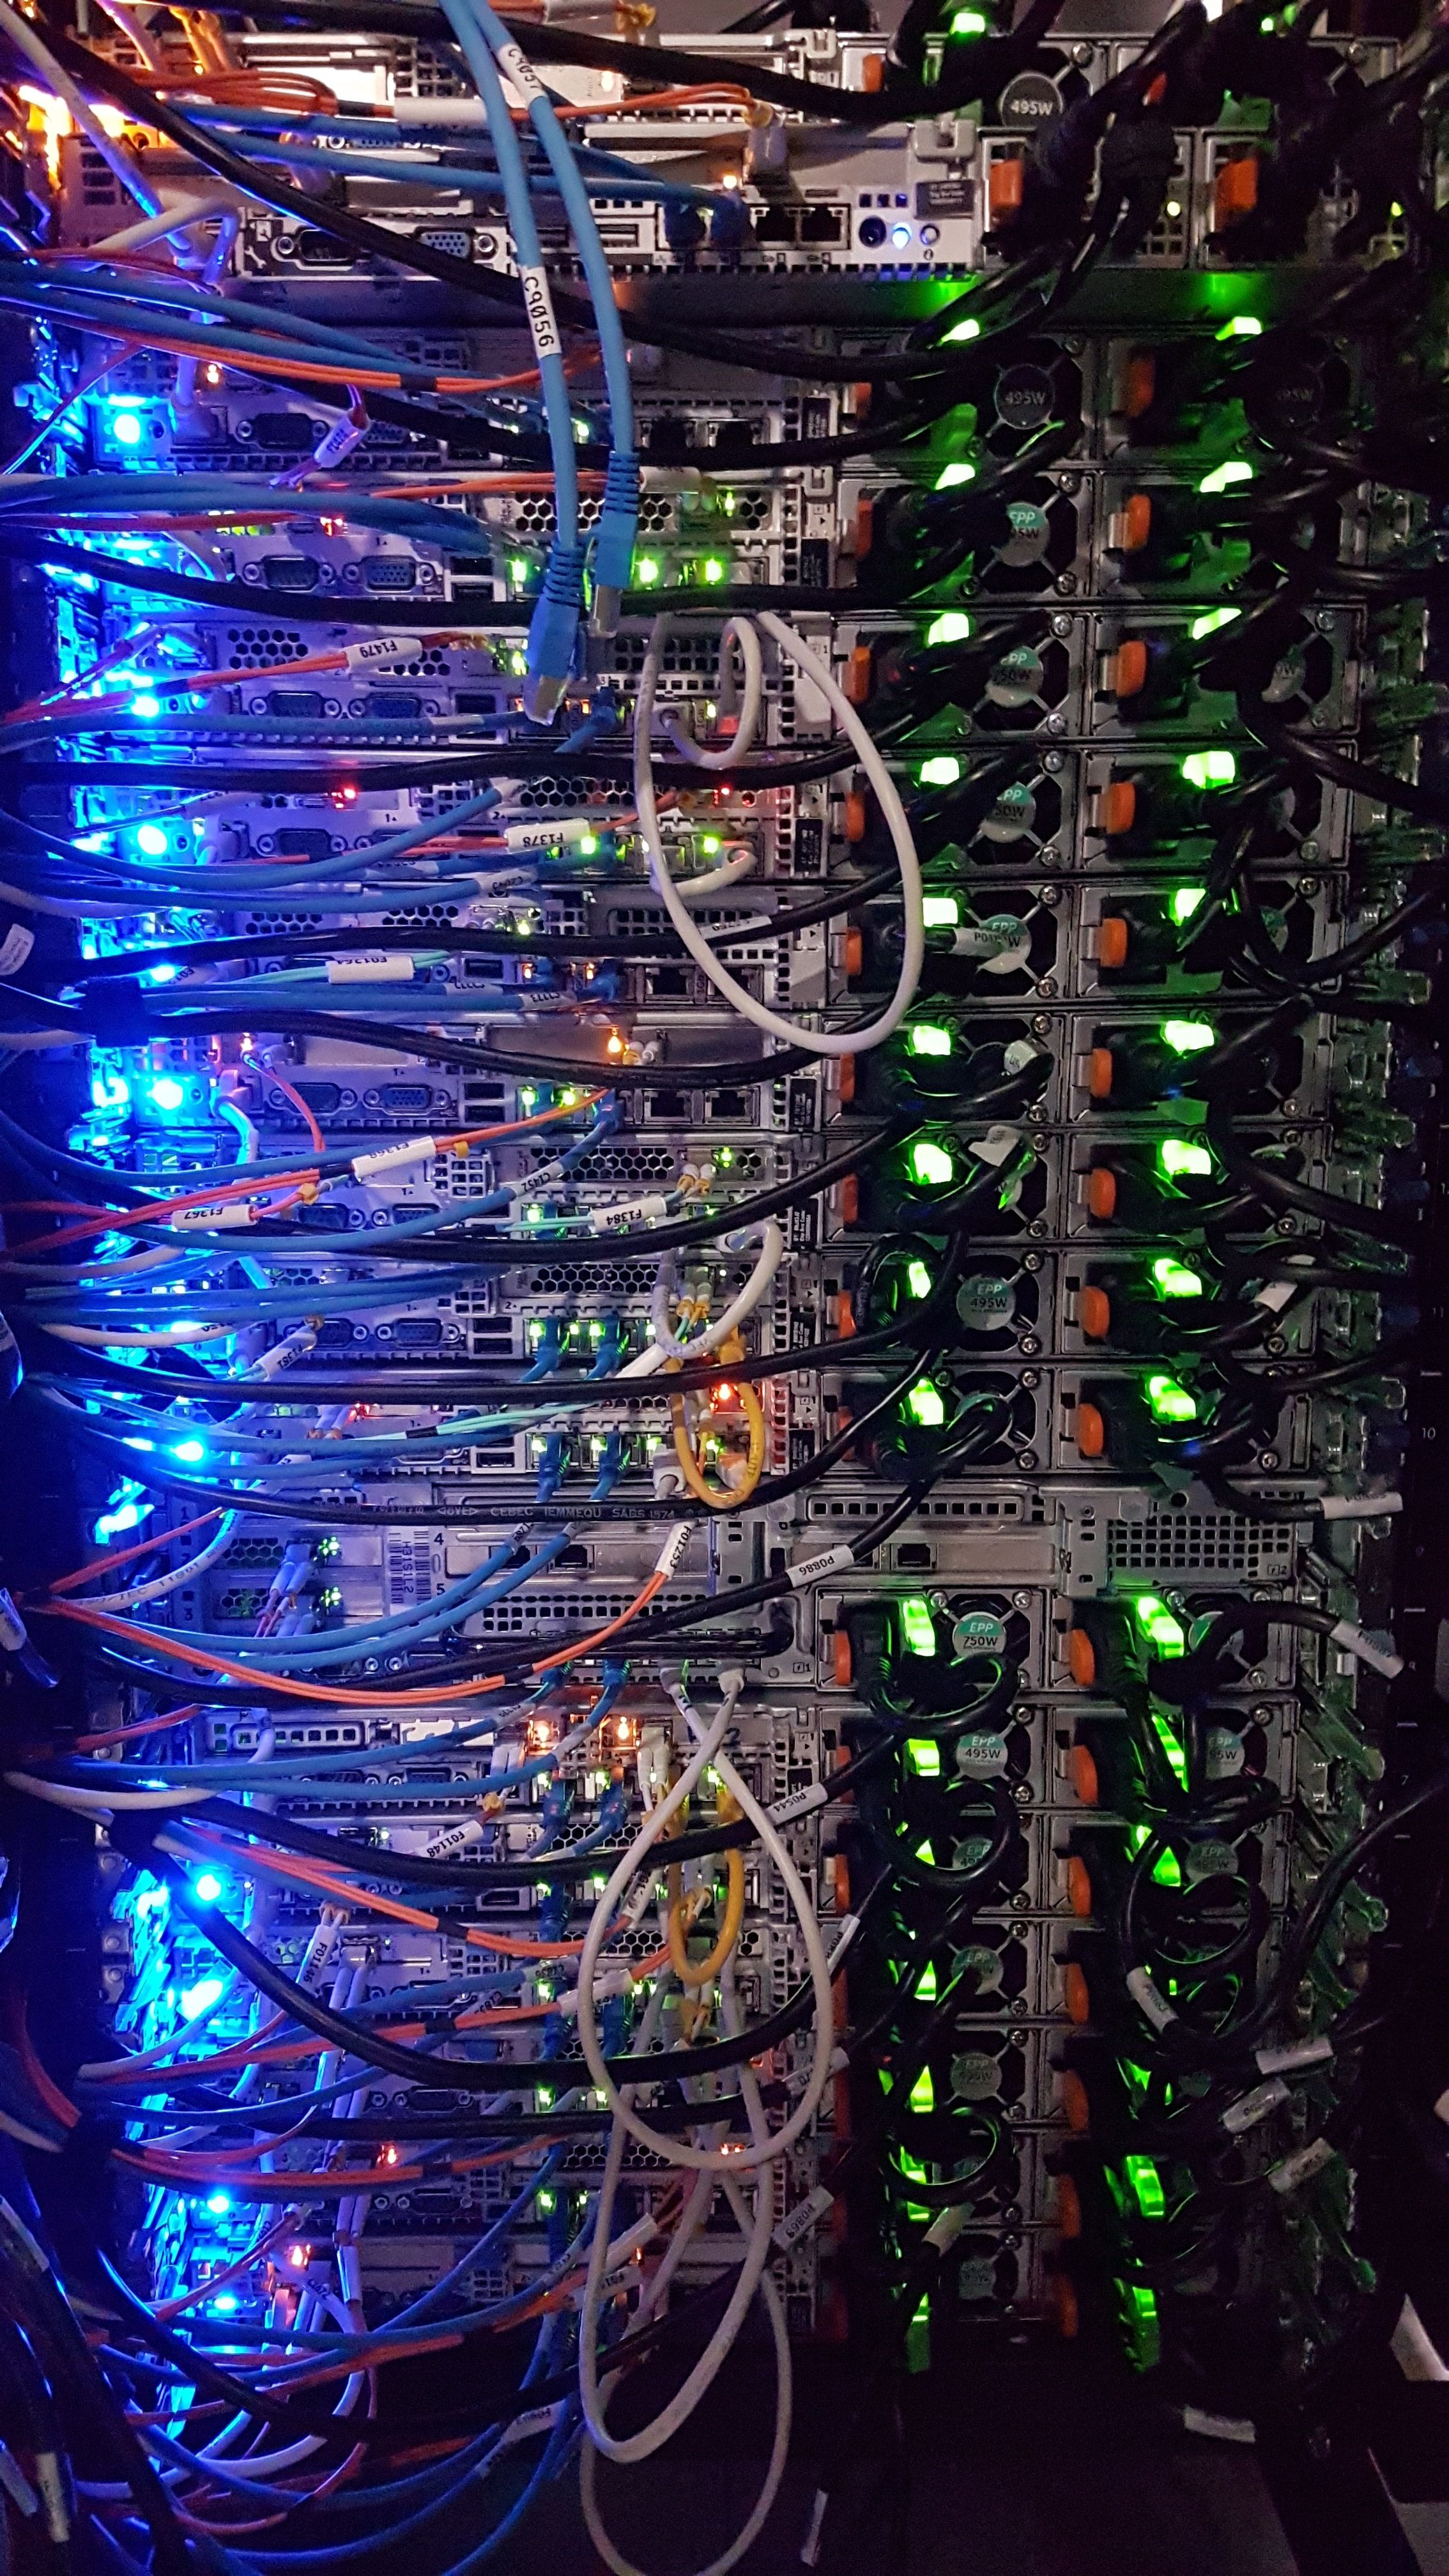 This picture is a bank of servers, each one only a few centimetres high and with very neat cabling. 